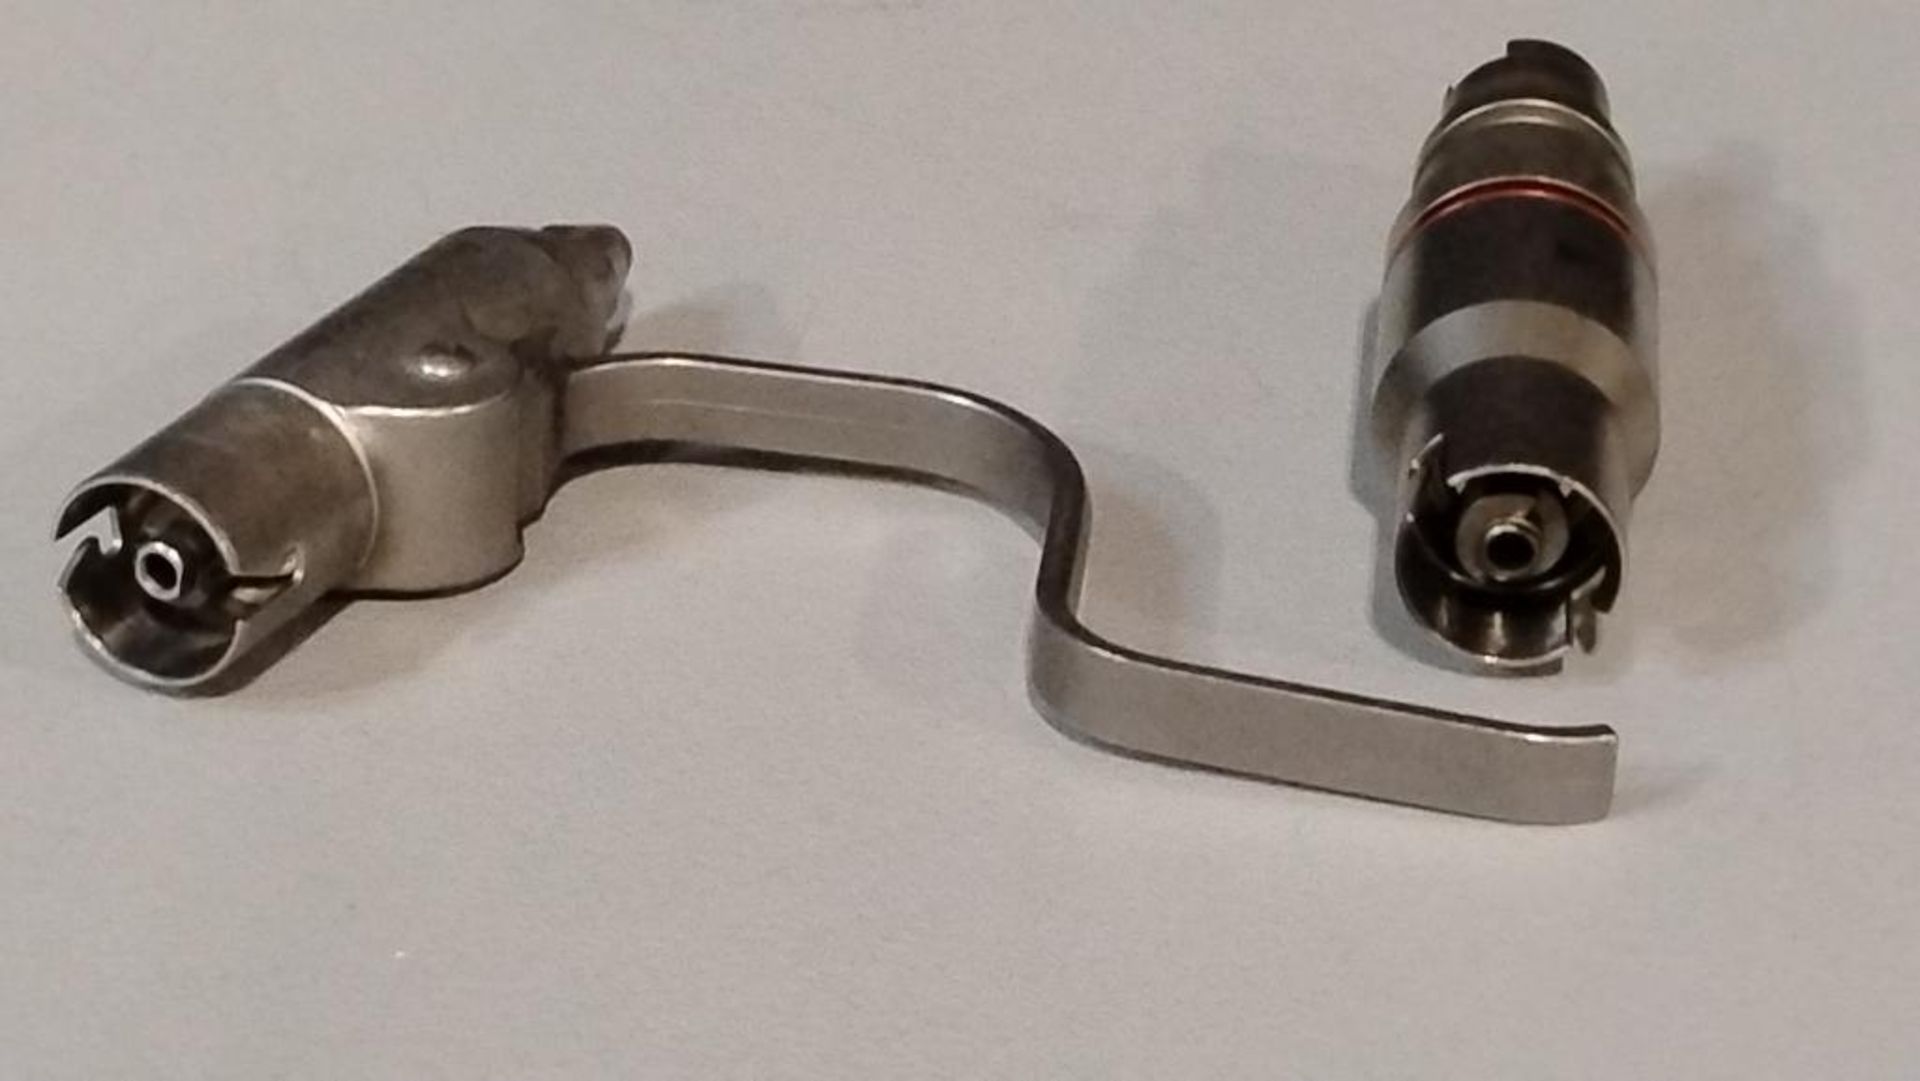 STRYKER 4100-125 PIN COLLET & 4100-235 HUDSON MODIFIED TRINKLE - Image 2 of 2